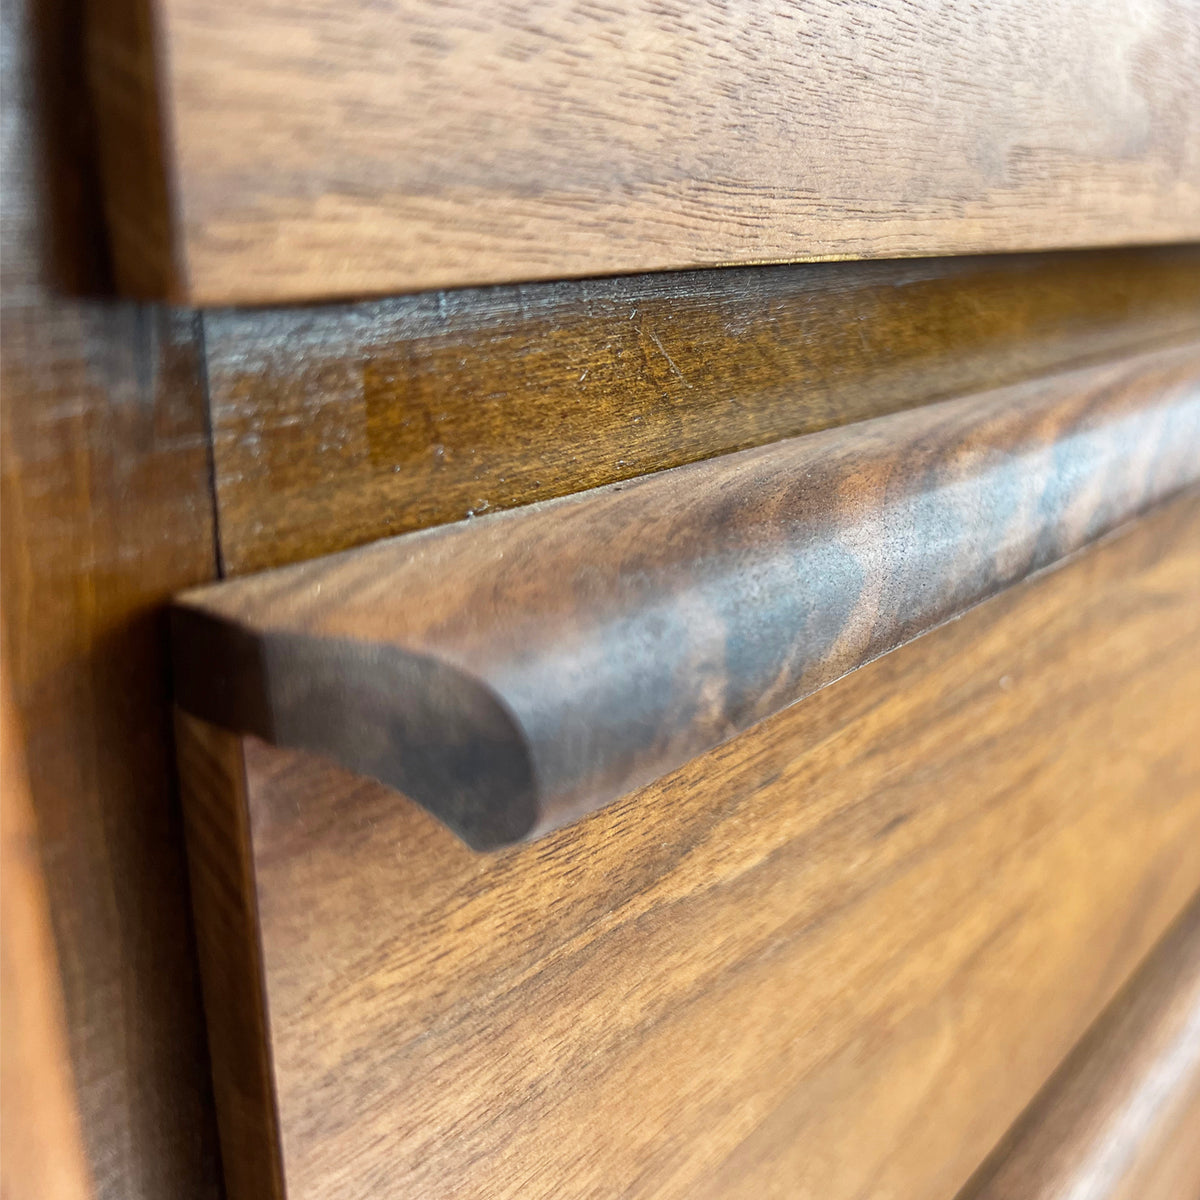 HPL Walnut Chest of Drawers